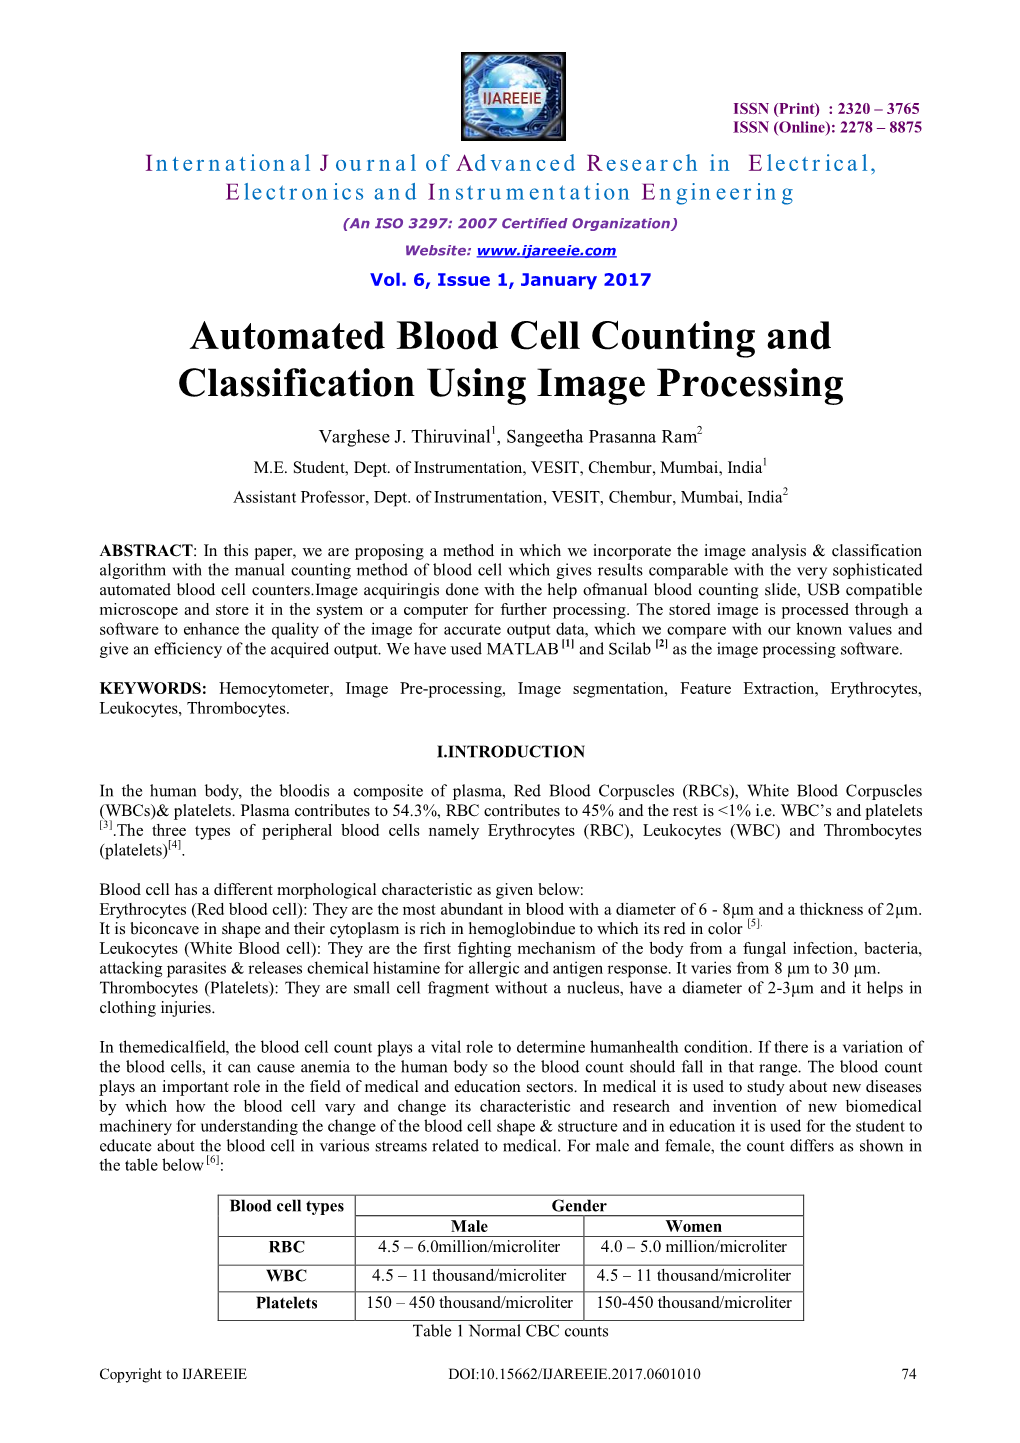 Automated Blood Cell Counting and Classification Using Image Processing